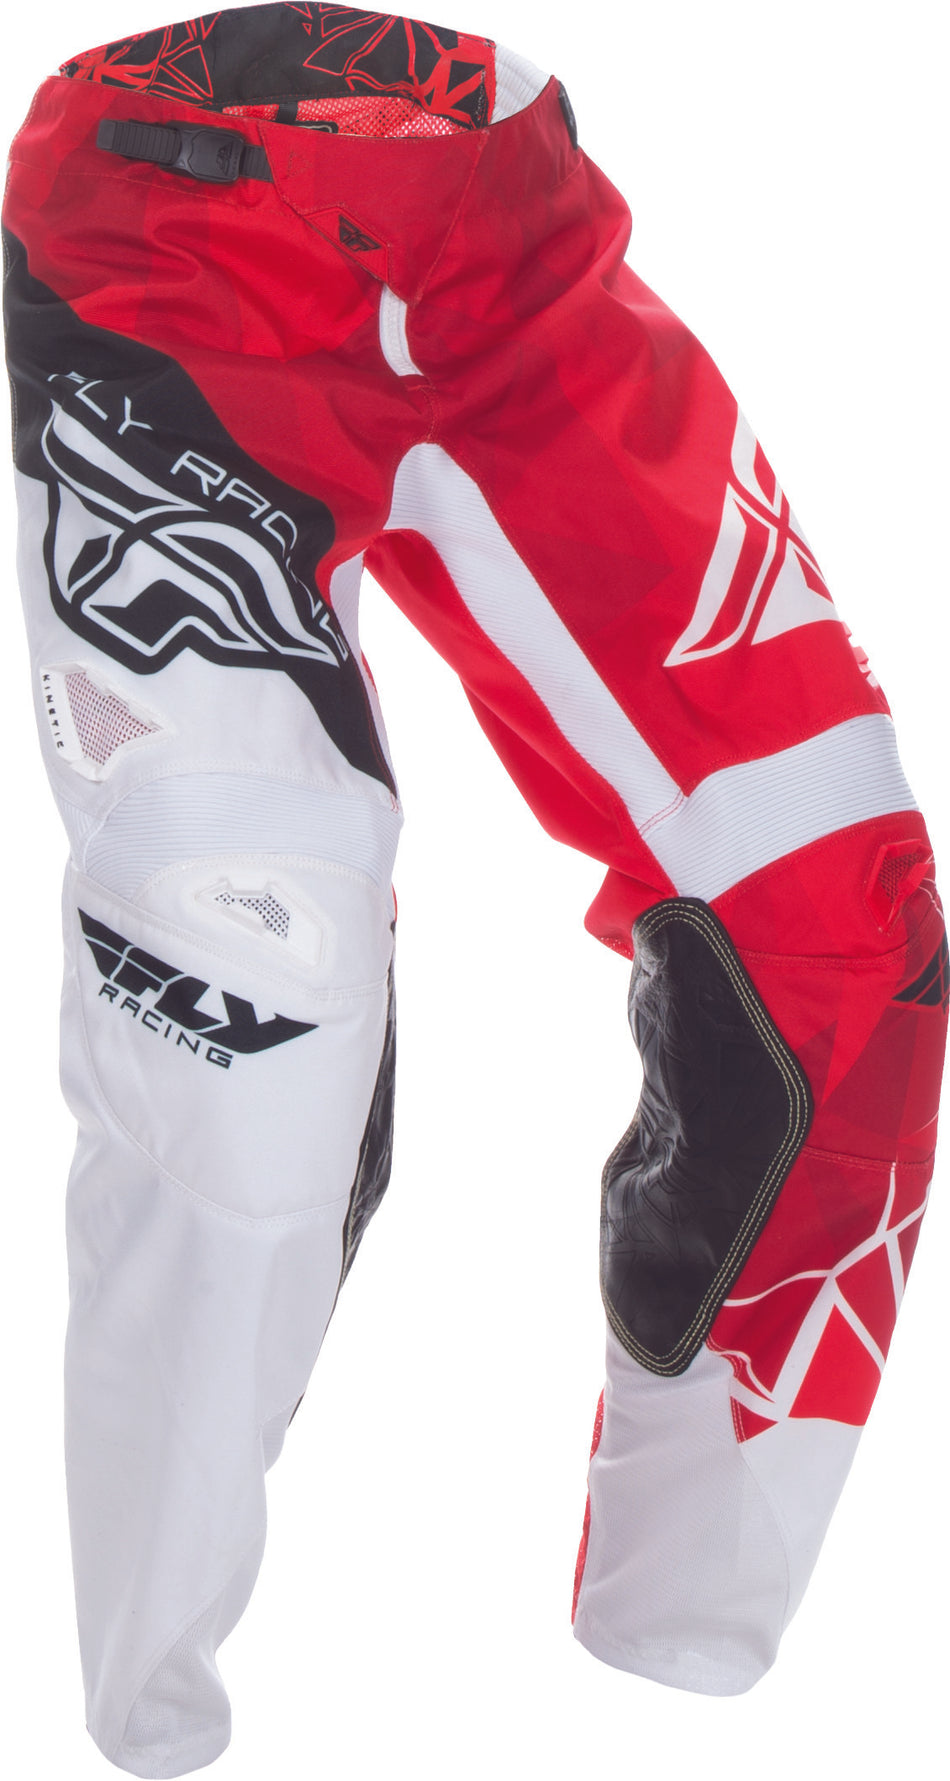 FLY RACING Kinetic Crux Pant Red/White Sz 30 370-53230